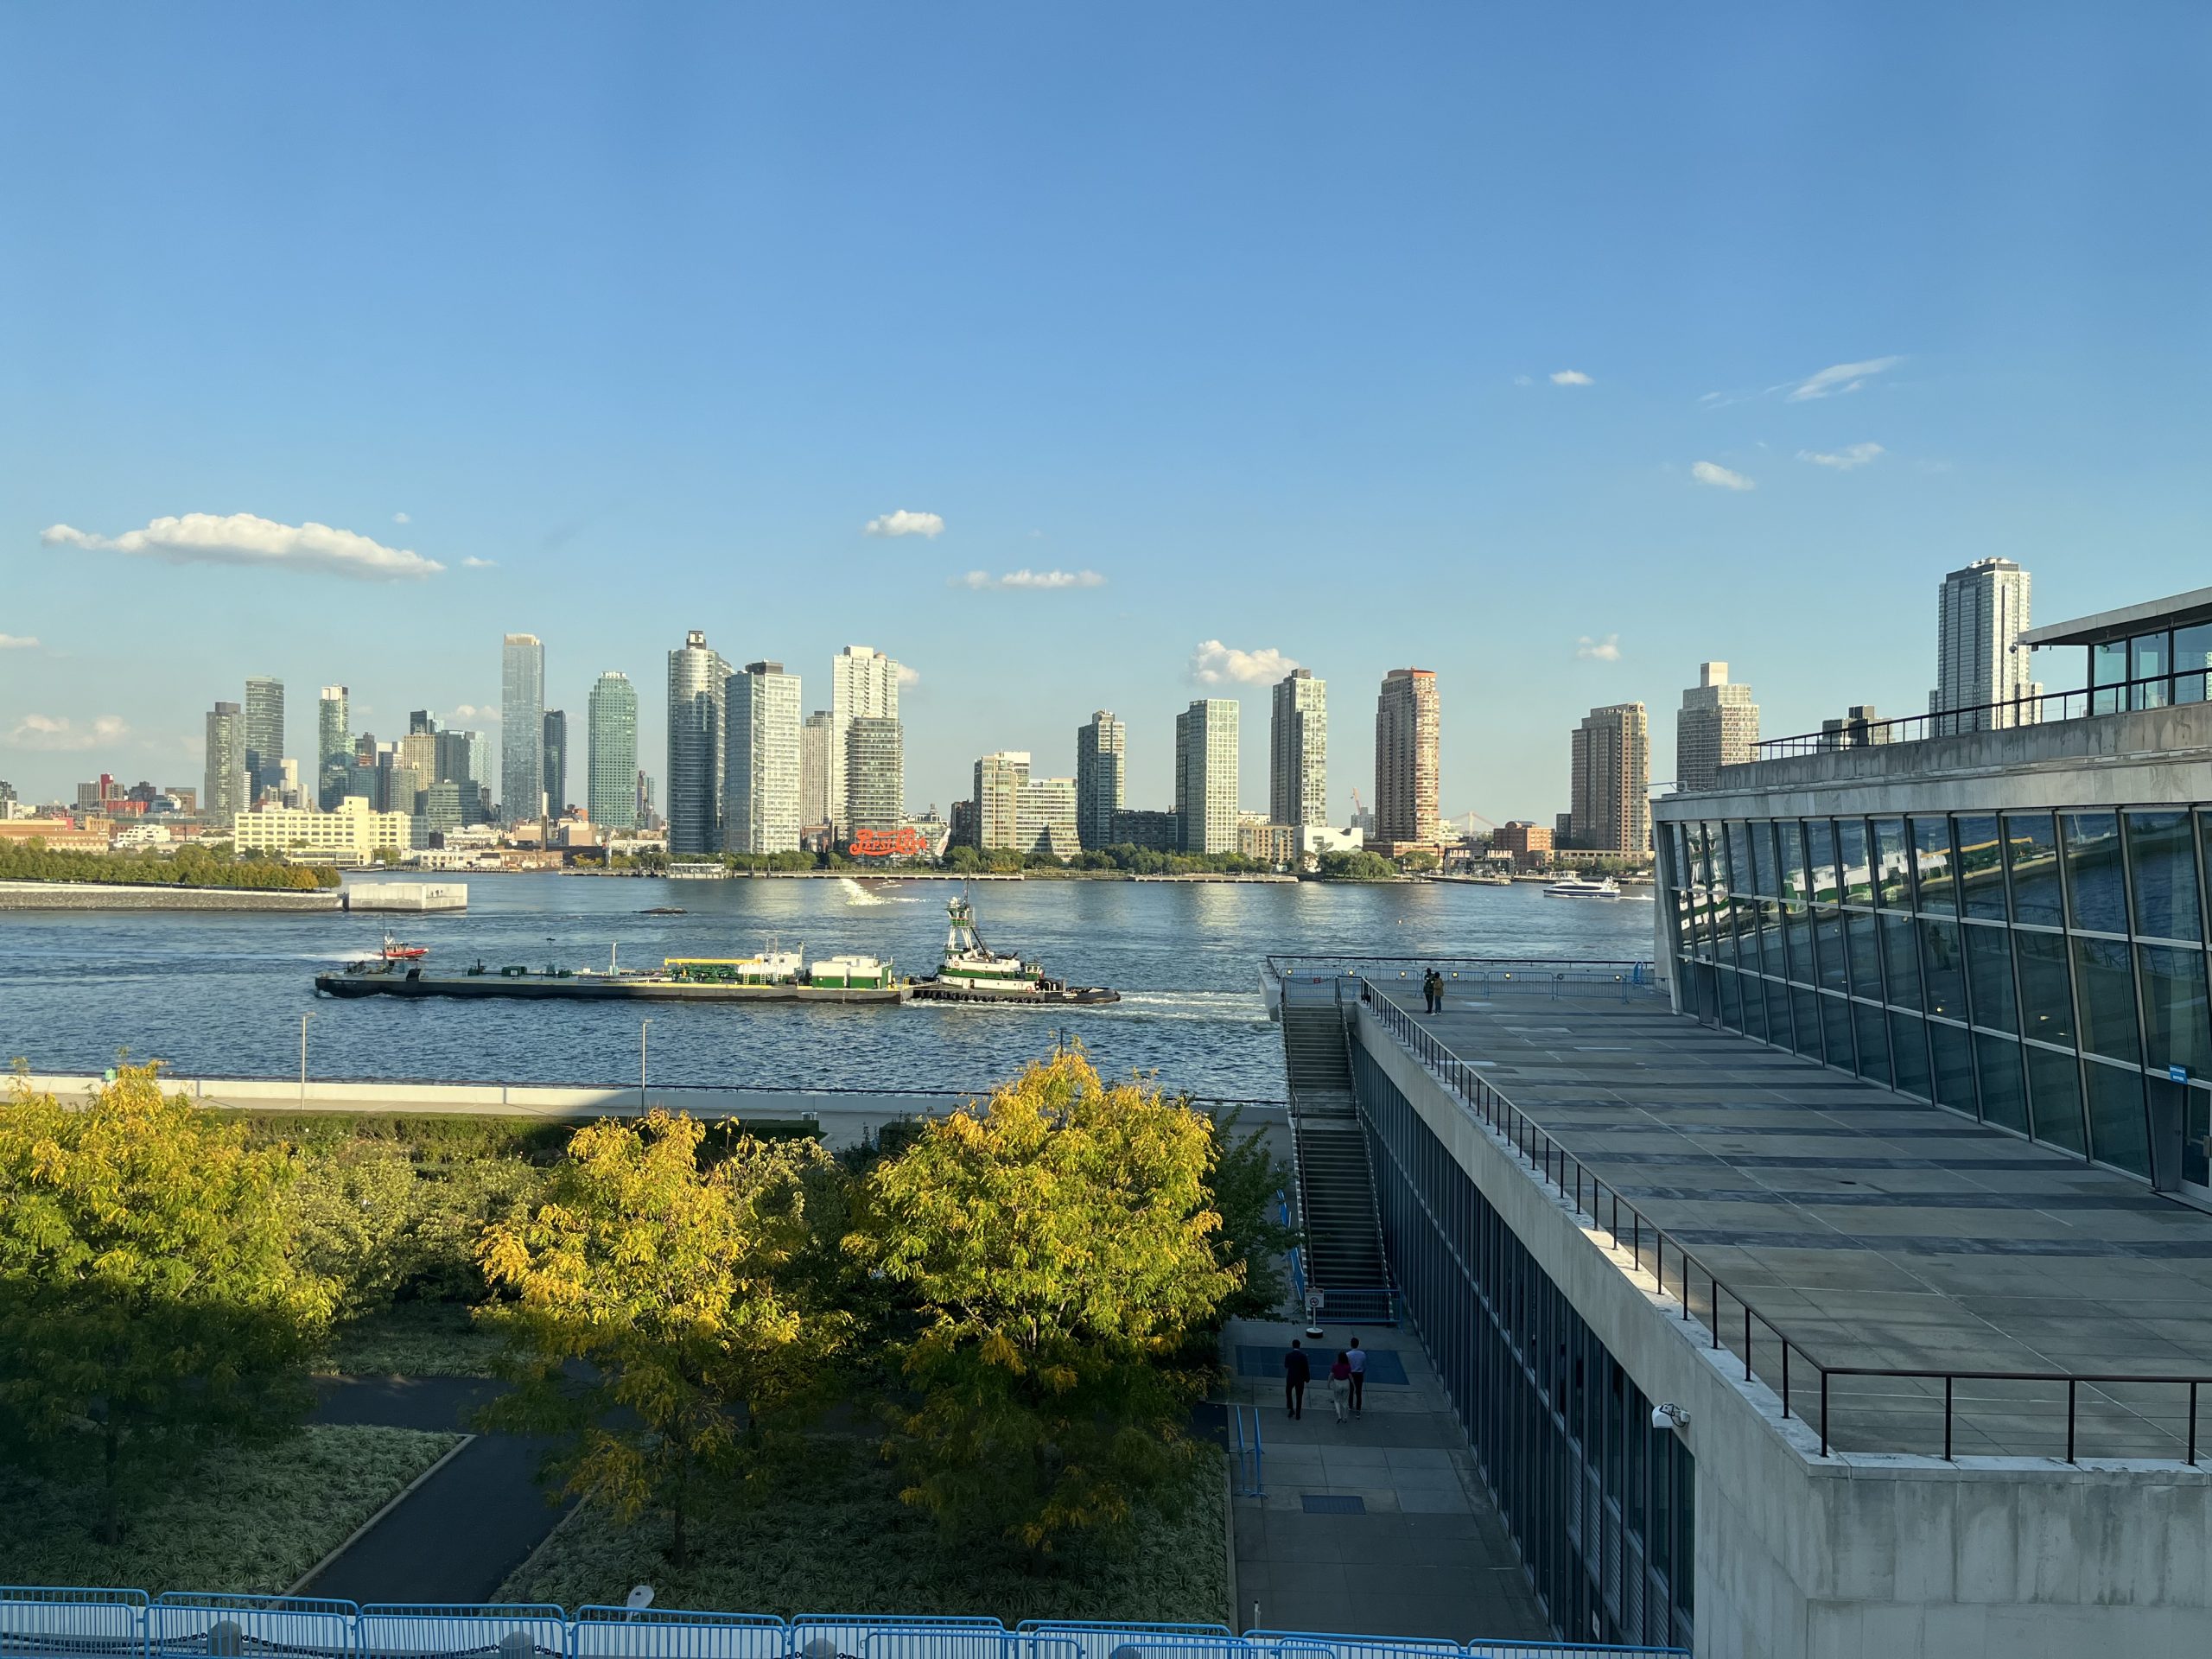 Looking out across the East River from the UN